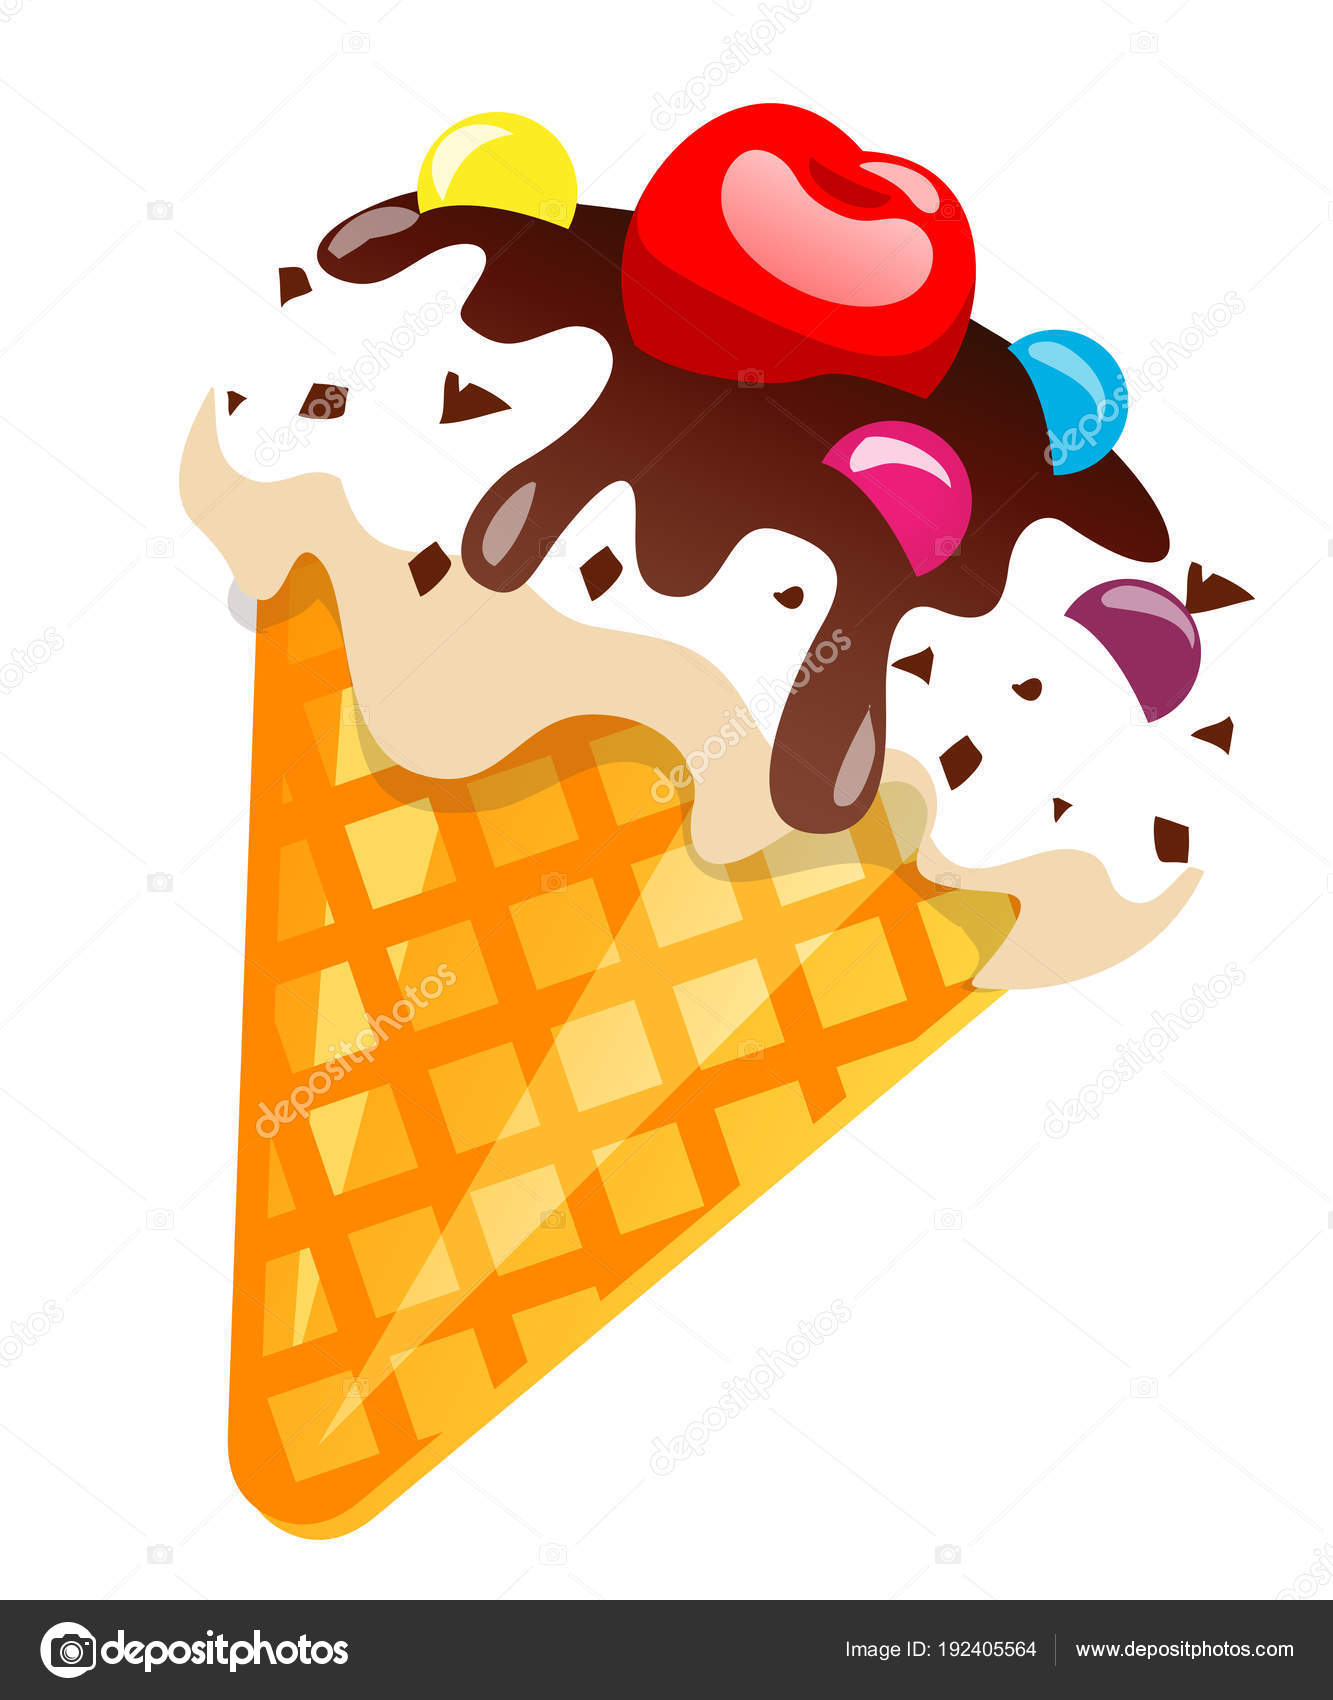 Clipart Ice Cream Ice Cream Cone With Chocolate And Cherry Vector Illustration Clip Art Isolated On White Background Stock Vector C Ira Pavlovich Ukr Net